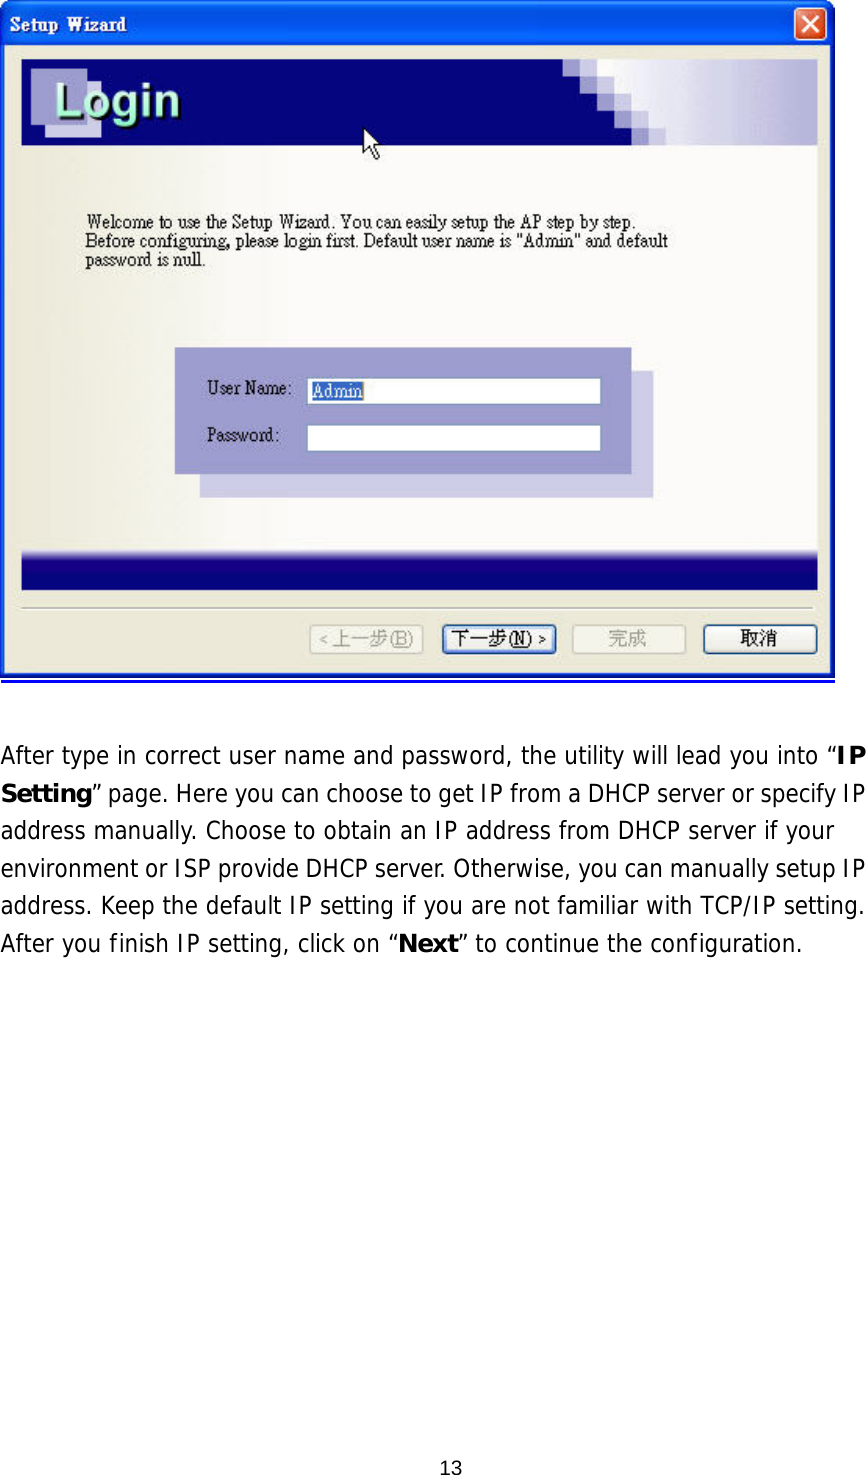   After type in correct user name and password, the utility will lead you into “IP Setting” page. Here you can choose to get IP from a DHCP server or specify IP address manually. Choose to obtain an IP address from DHCP server if your environment or ISP provide DHCP server. Otherwise, you can manually setup IP address. Keep the default IP setting if you are not familiar with TCP/IP setting. After you finish IP setting, click on “Next” to continue the configuration.   13